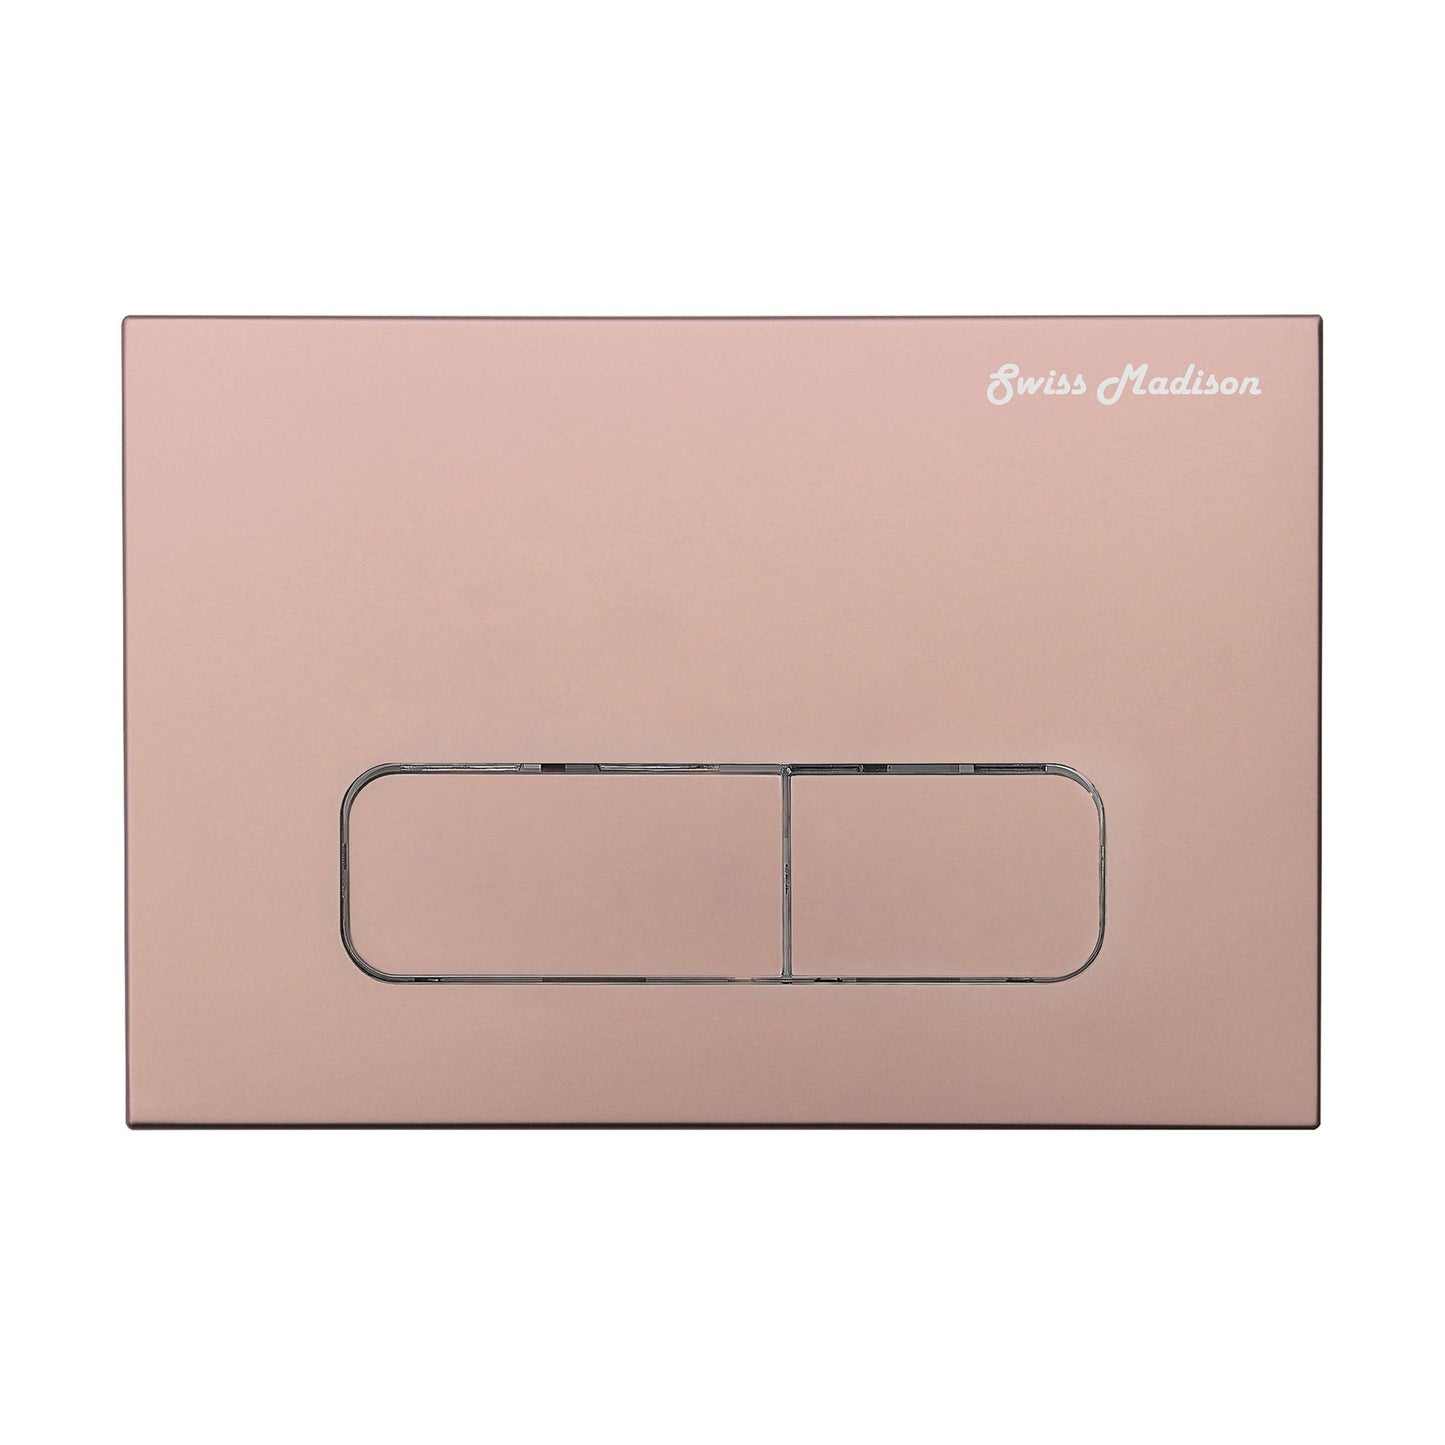 Swiss Madison 10" Rose Gold Wall-Mounted Actuator Flush Push Button Plate With Dual Flush System and Rectangle Buttons